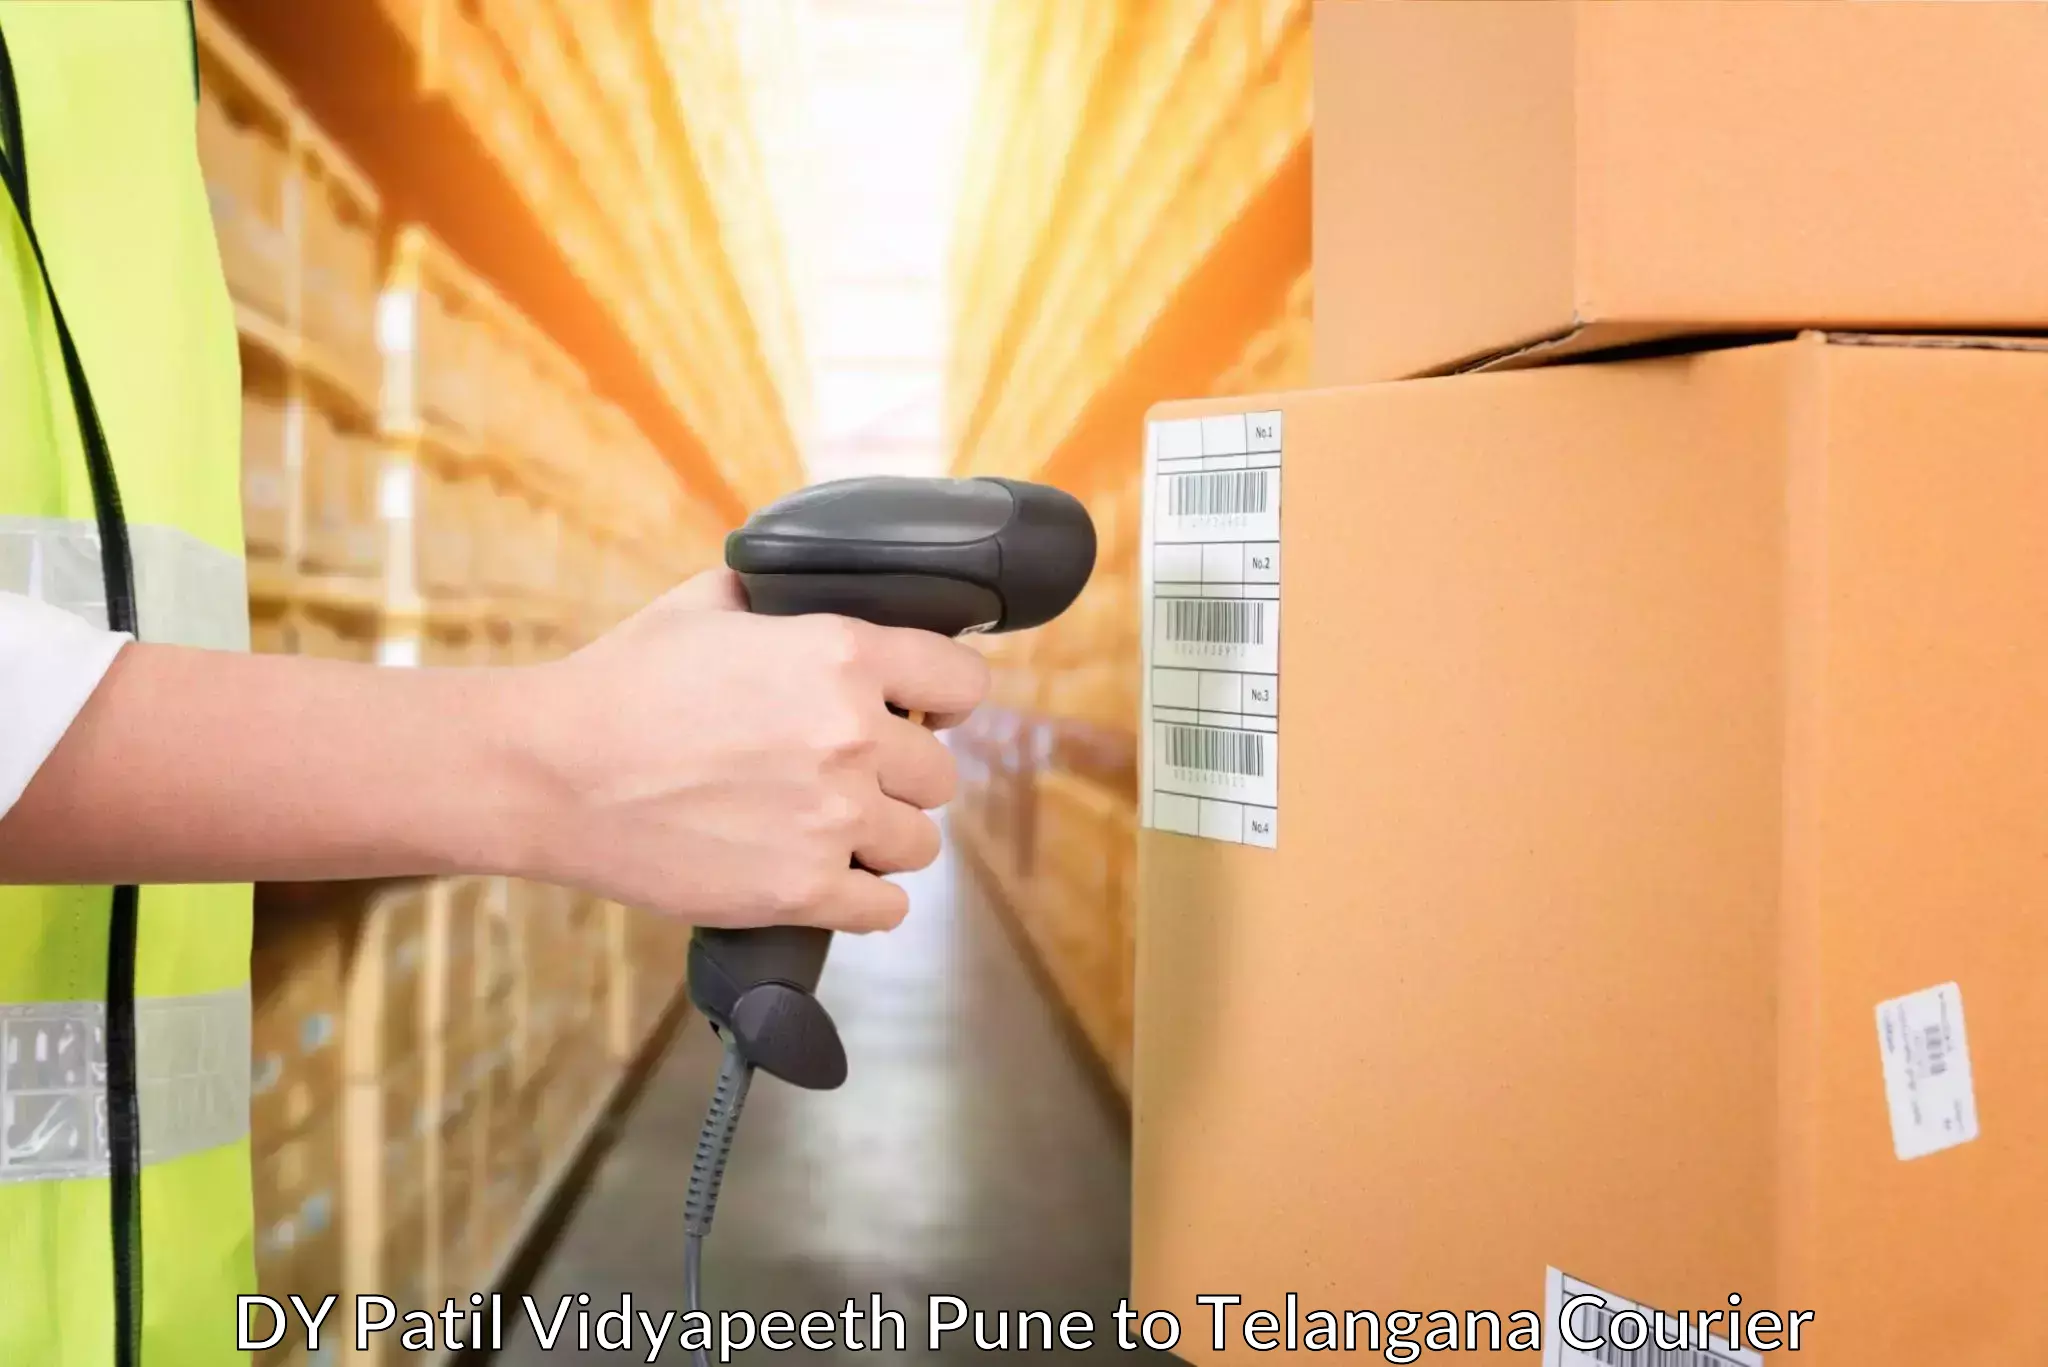 End-to-end delivery DY Patil Vidyapeeth Pune to Pathipaka